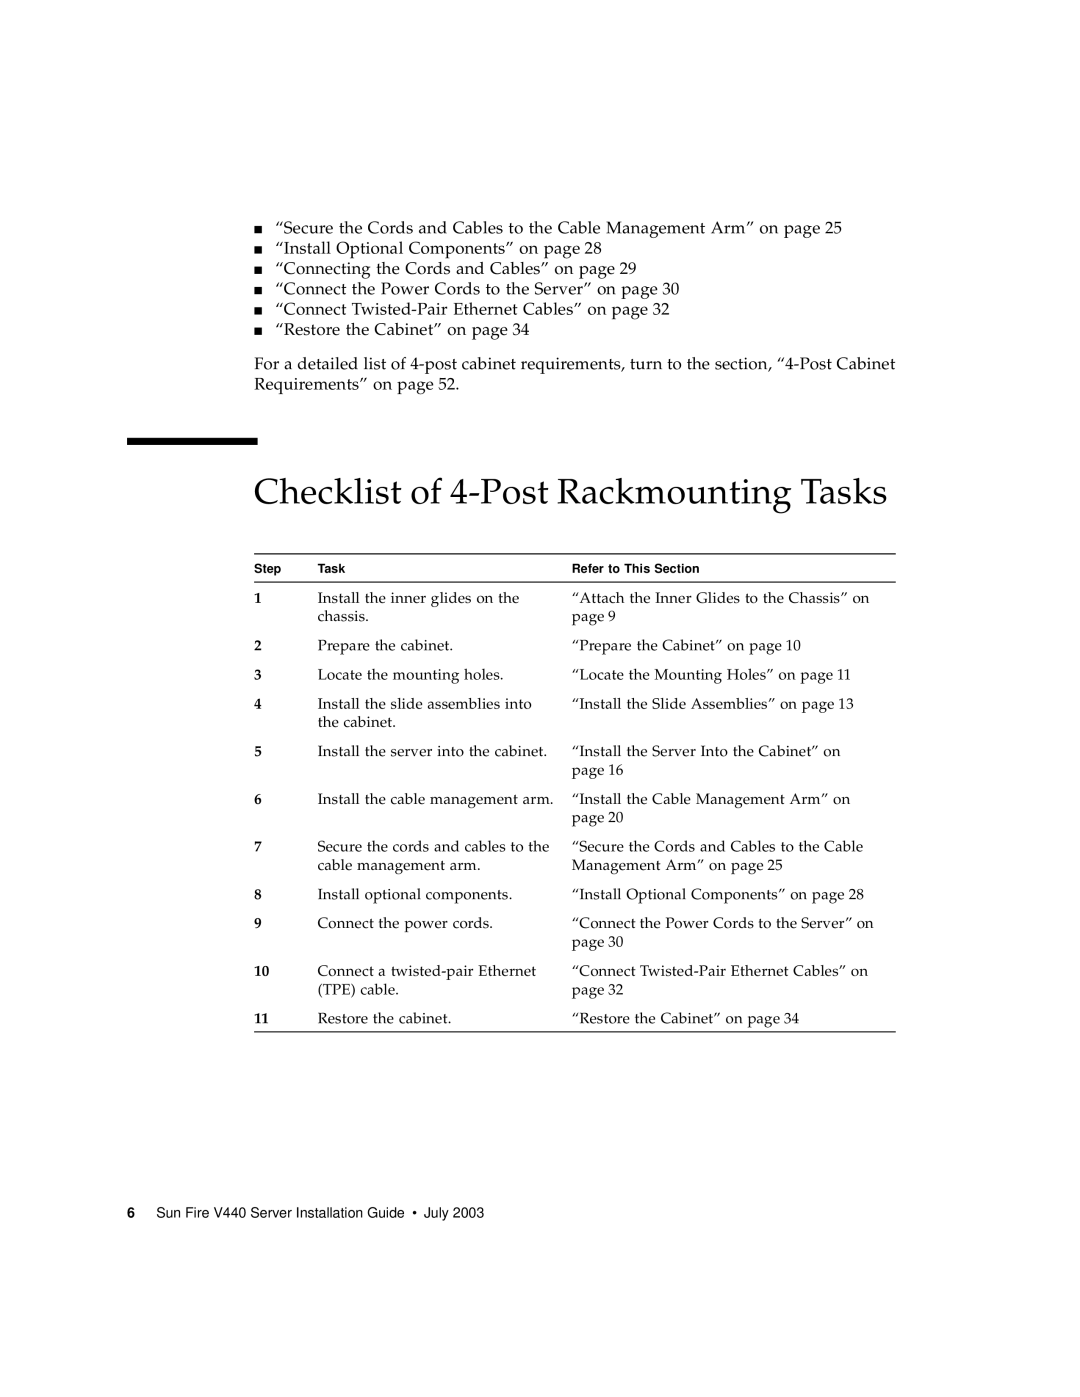 Sun Microsystems 816-7727-10 manual Checklist of 4-Post Rackmounting Tasks, “Install Optional Components” on page 